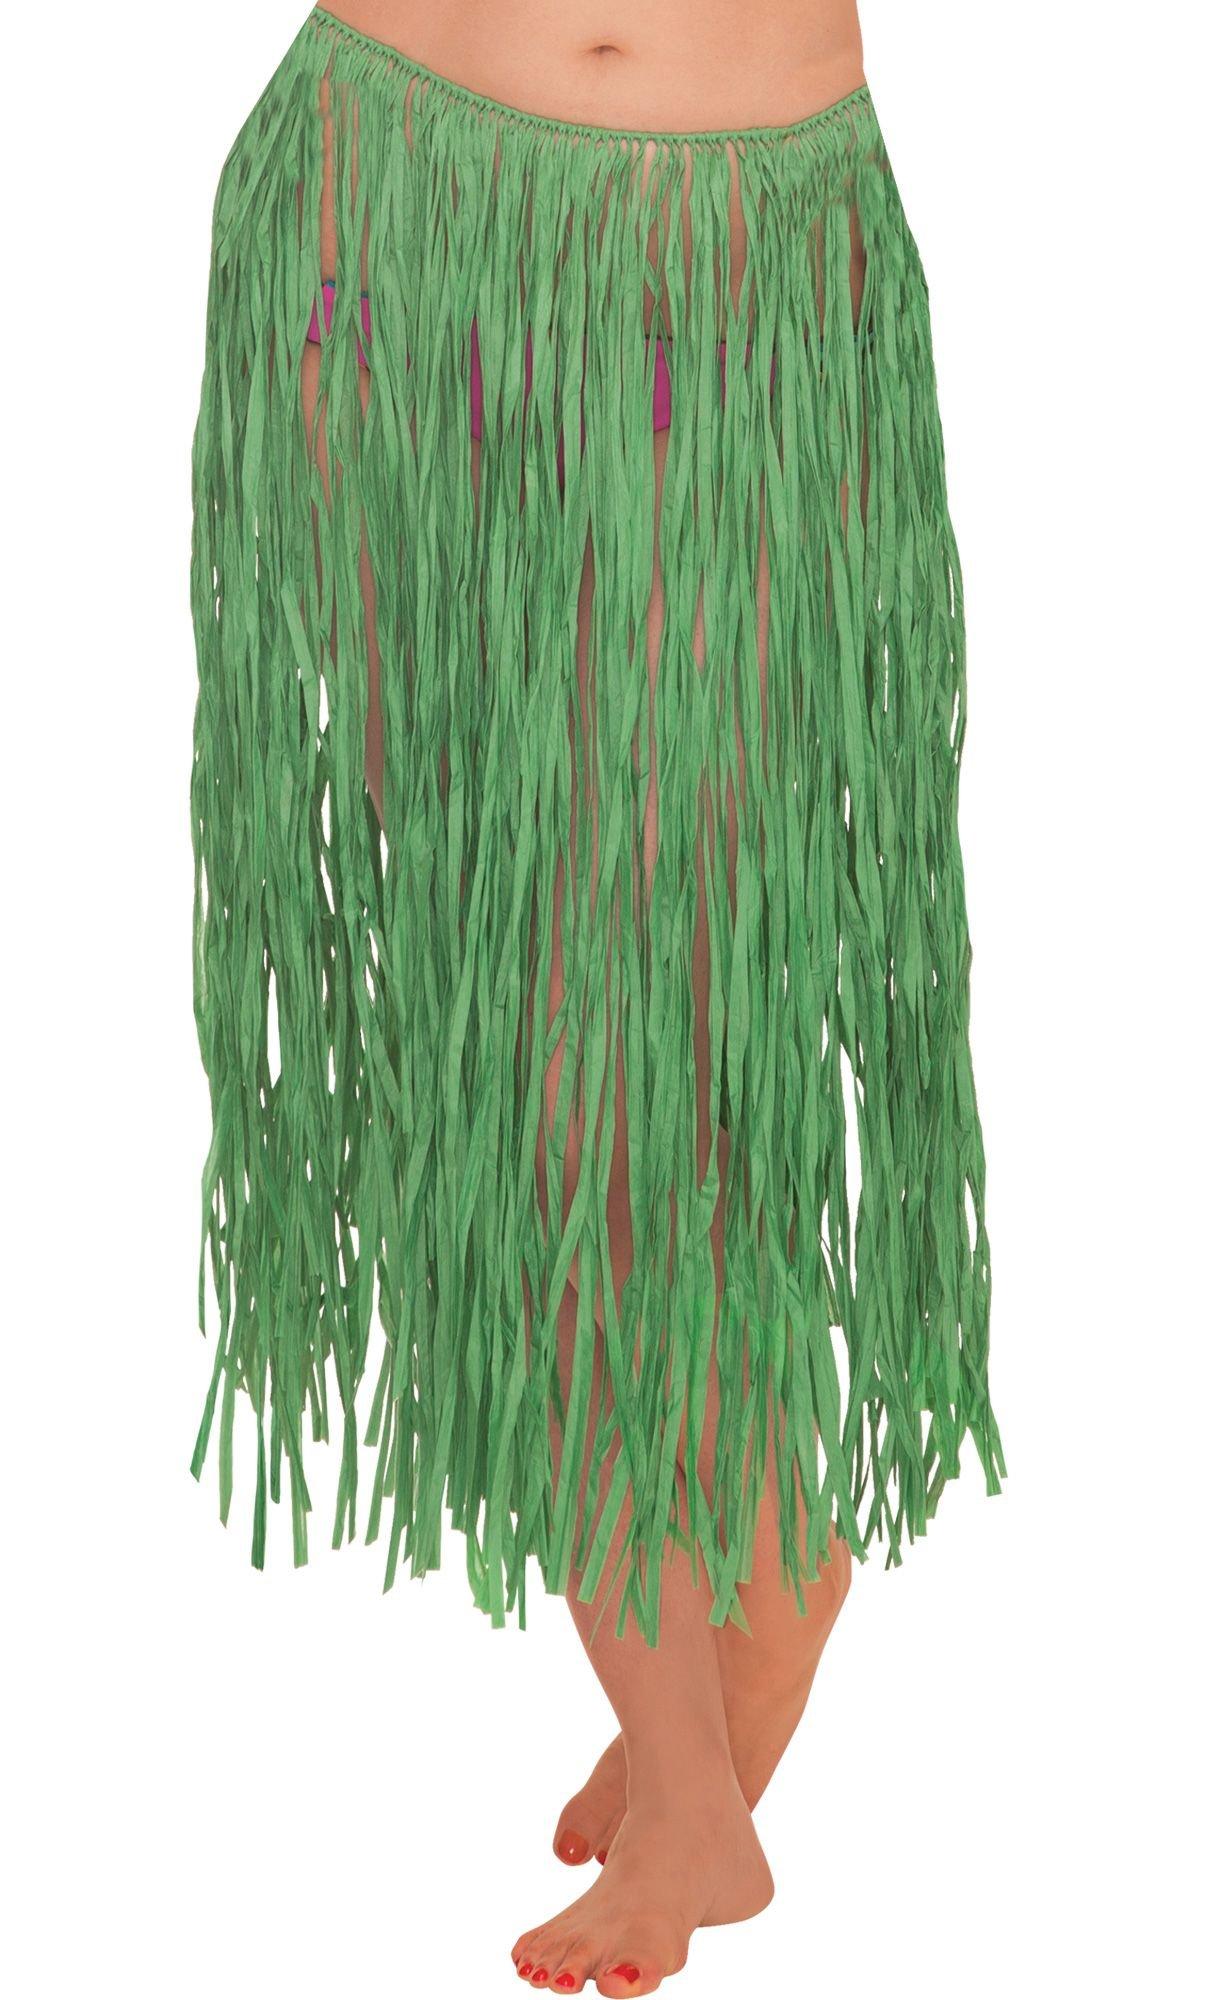  Brown Natural Raffia Grass Hula Skirt For Adults - L/XL, 1 Pc -  Unique, Durable & Adjustable - Perfect For Hawaiian-Themed Party & Costume  Dress-up Fun : Clothing, Shoes & Jewelry